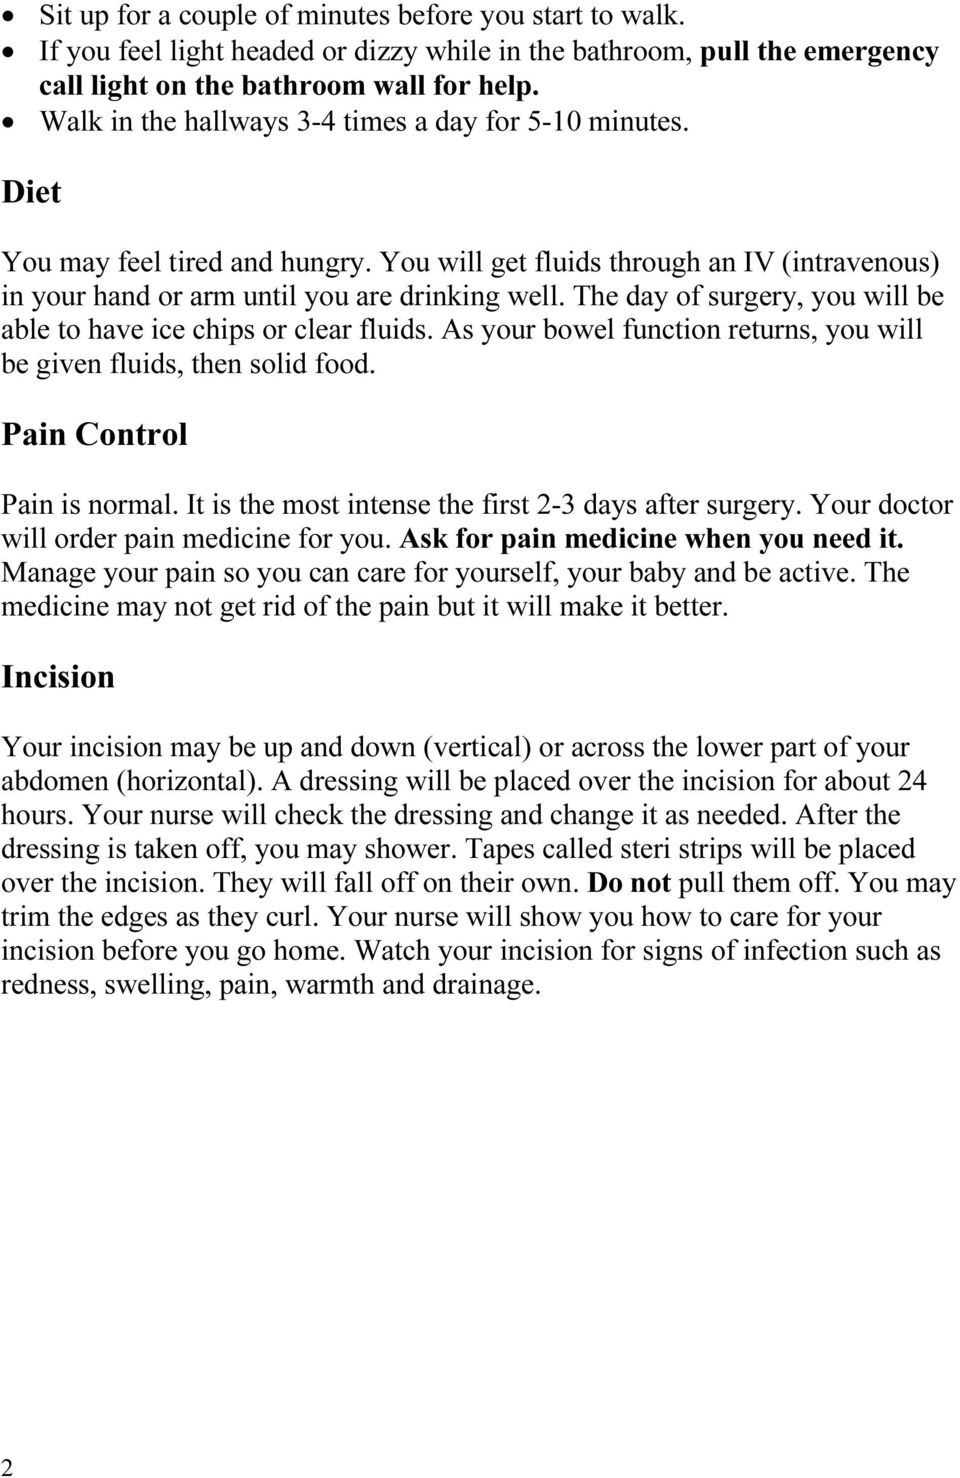 The day of surgery, you will be able to have ice chips or clear fluids. As your bowel function returns, you will be given fluids, then solid food. Pain Control Pain is normal.